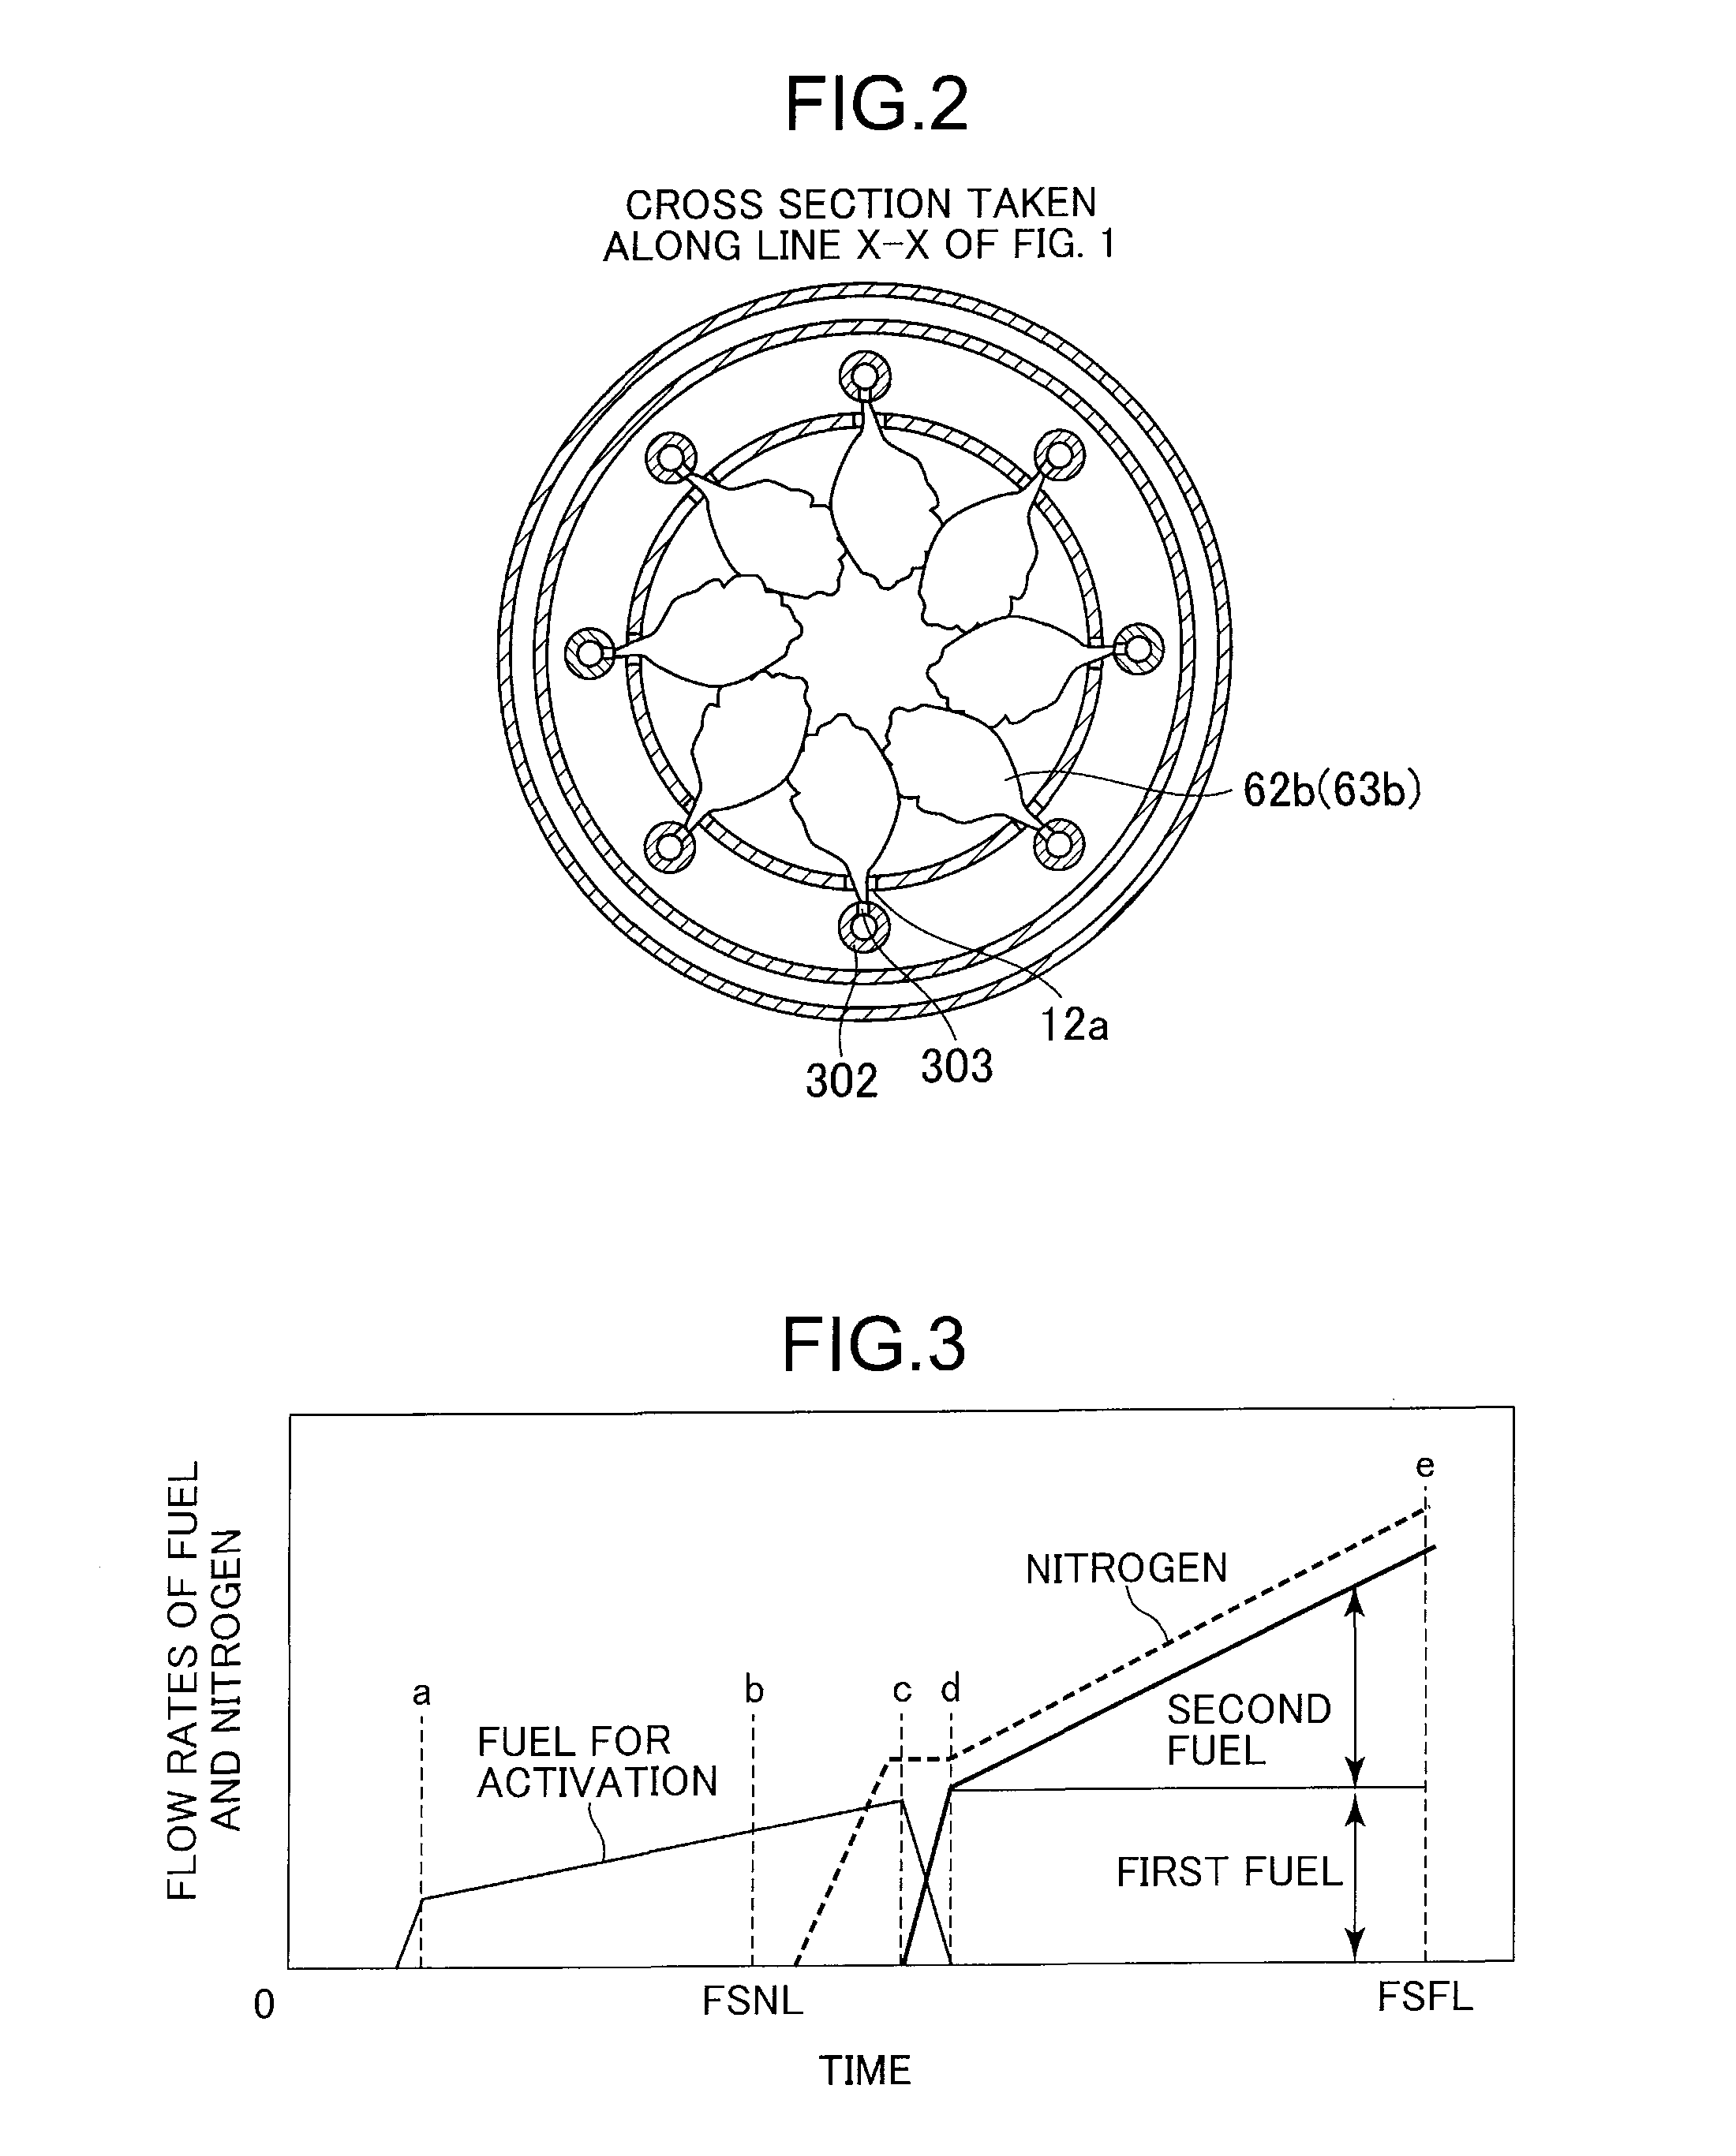 Low NOx Combustor for Hydrogen-Containing Fuel and its Operation